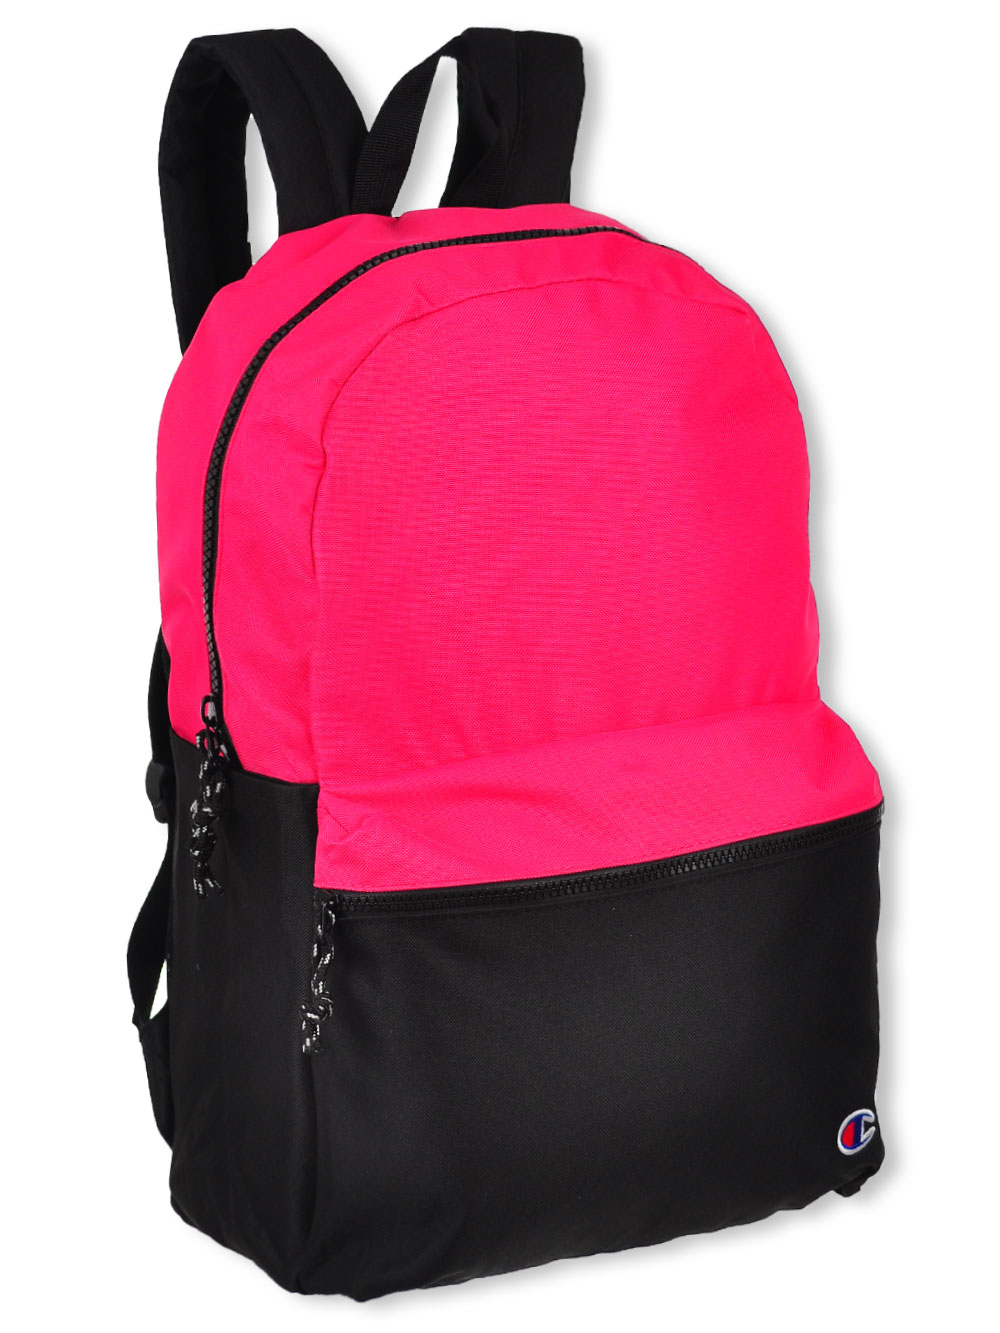 red champion backpack